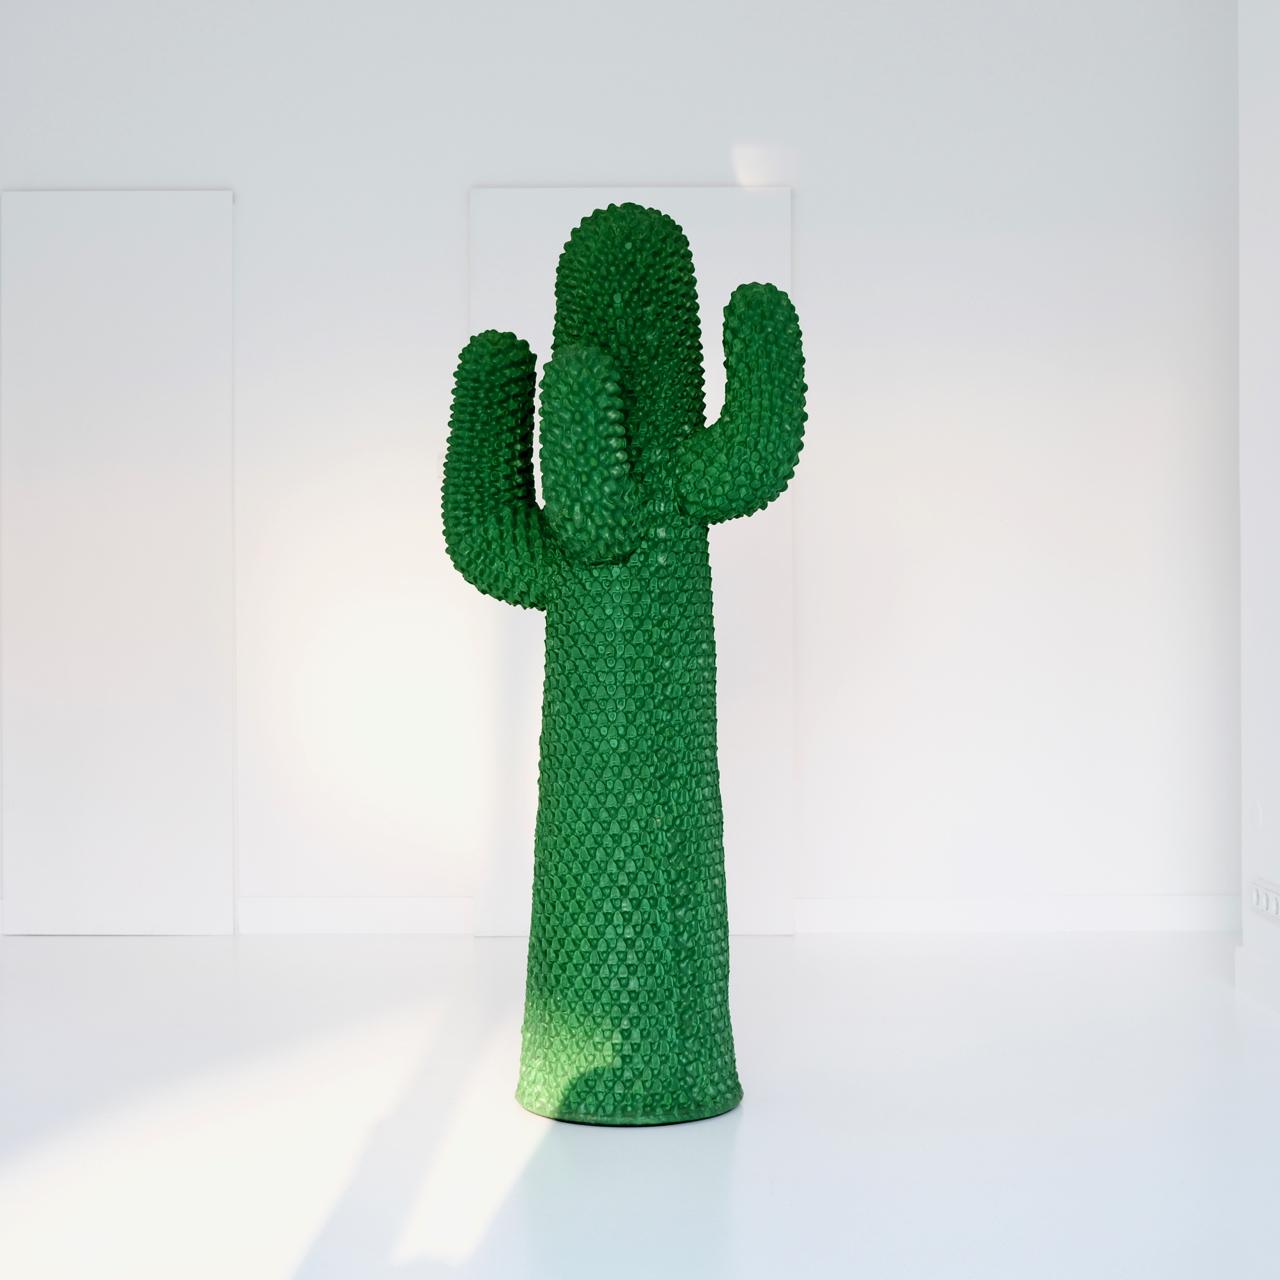 Original, rare four-armed coat stand Gufram ‘Cactus', produced in 1986 as number 640 of a series of 2000, in soft polyurethane, finished by hand in the original emerald green Guflac in a very good original condition. Label stamped at the bottom: